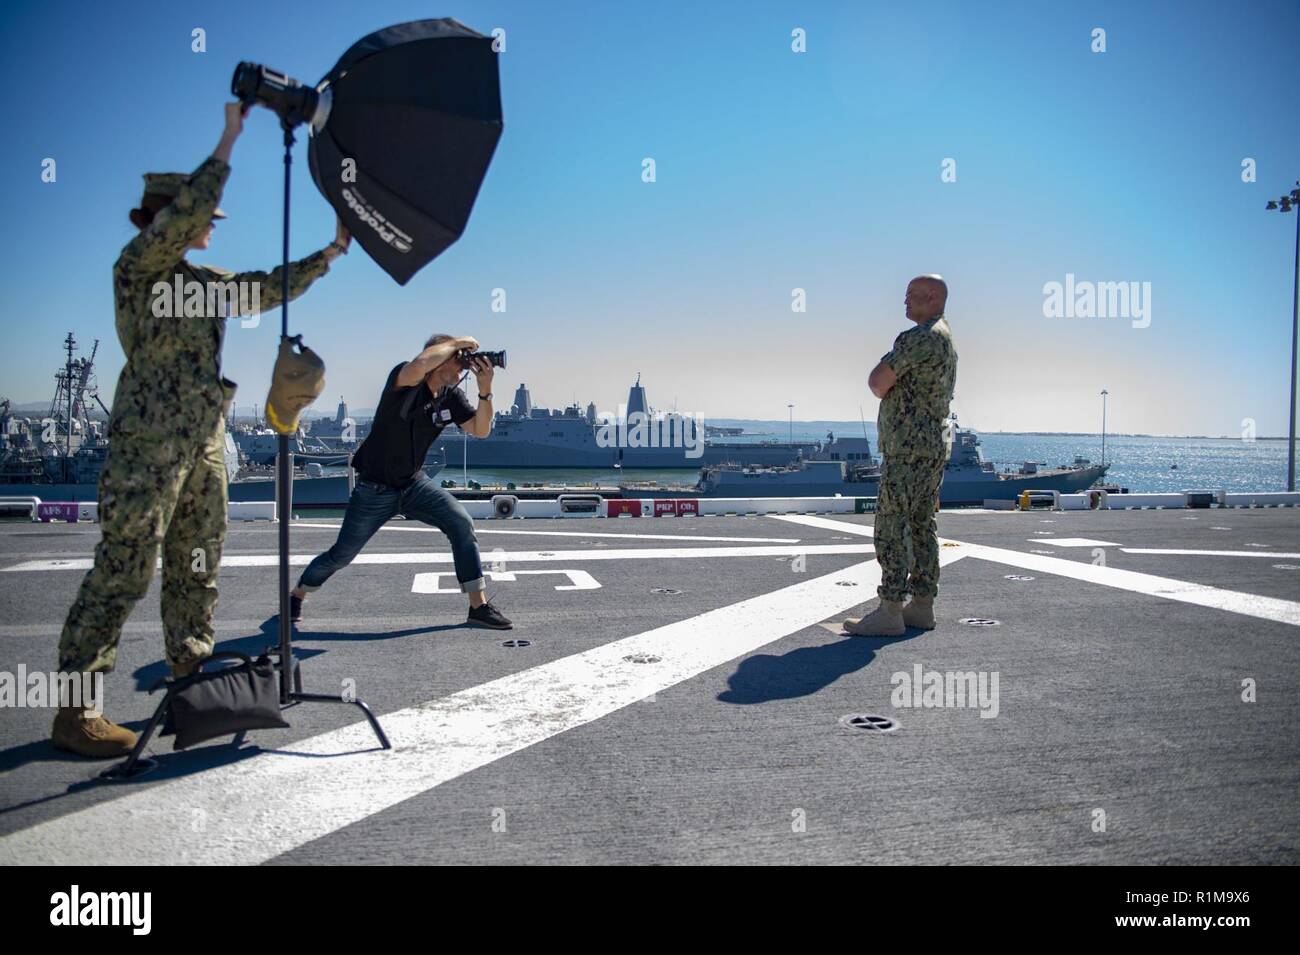 SAN DIEGO (Oct. 18, 2018) Capt. Rich LeBron, commanding officer of the amphibious assault ship USS Bonhomme Richard (LHD 6), poses for a photograph on the ship’s flight deck for an upcoming issue of San Diego Magazine. San Diego Magazine is a monthly publication concerning life in the San Diego region and is the city’s longest running lifestyle publication. Bonhomme Richard is in its homeport of San Diego. Stock Photo